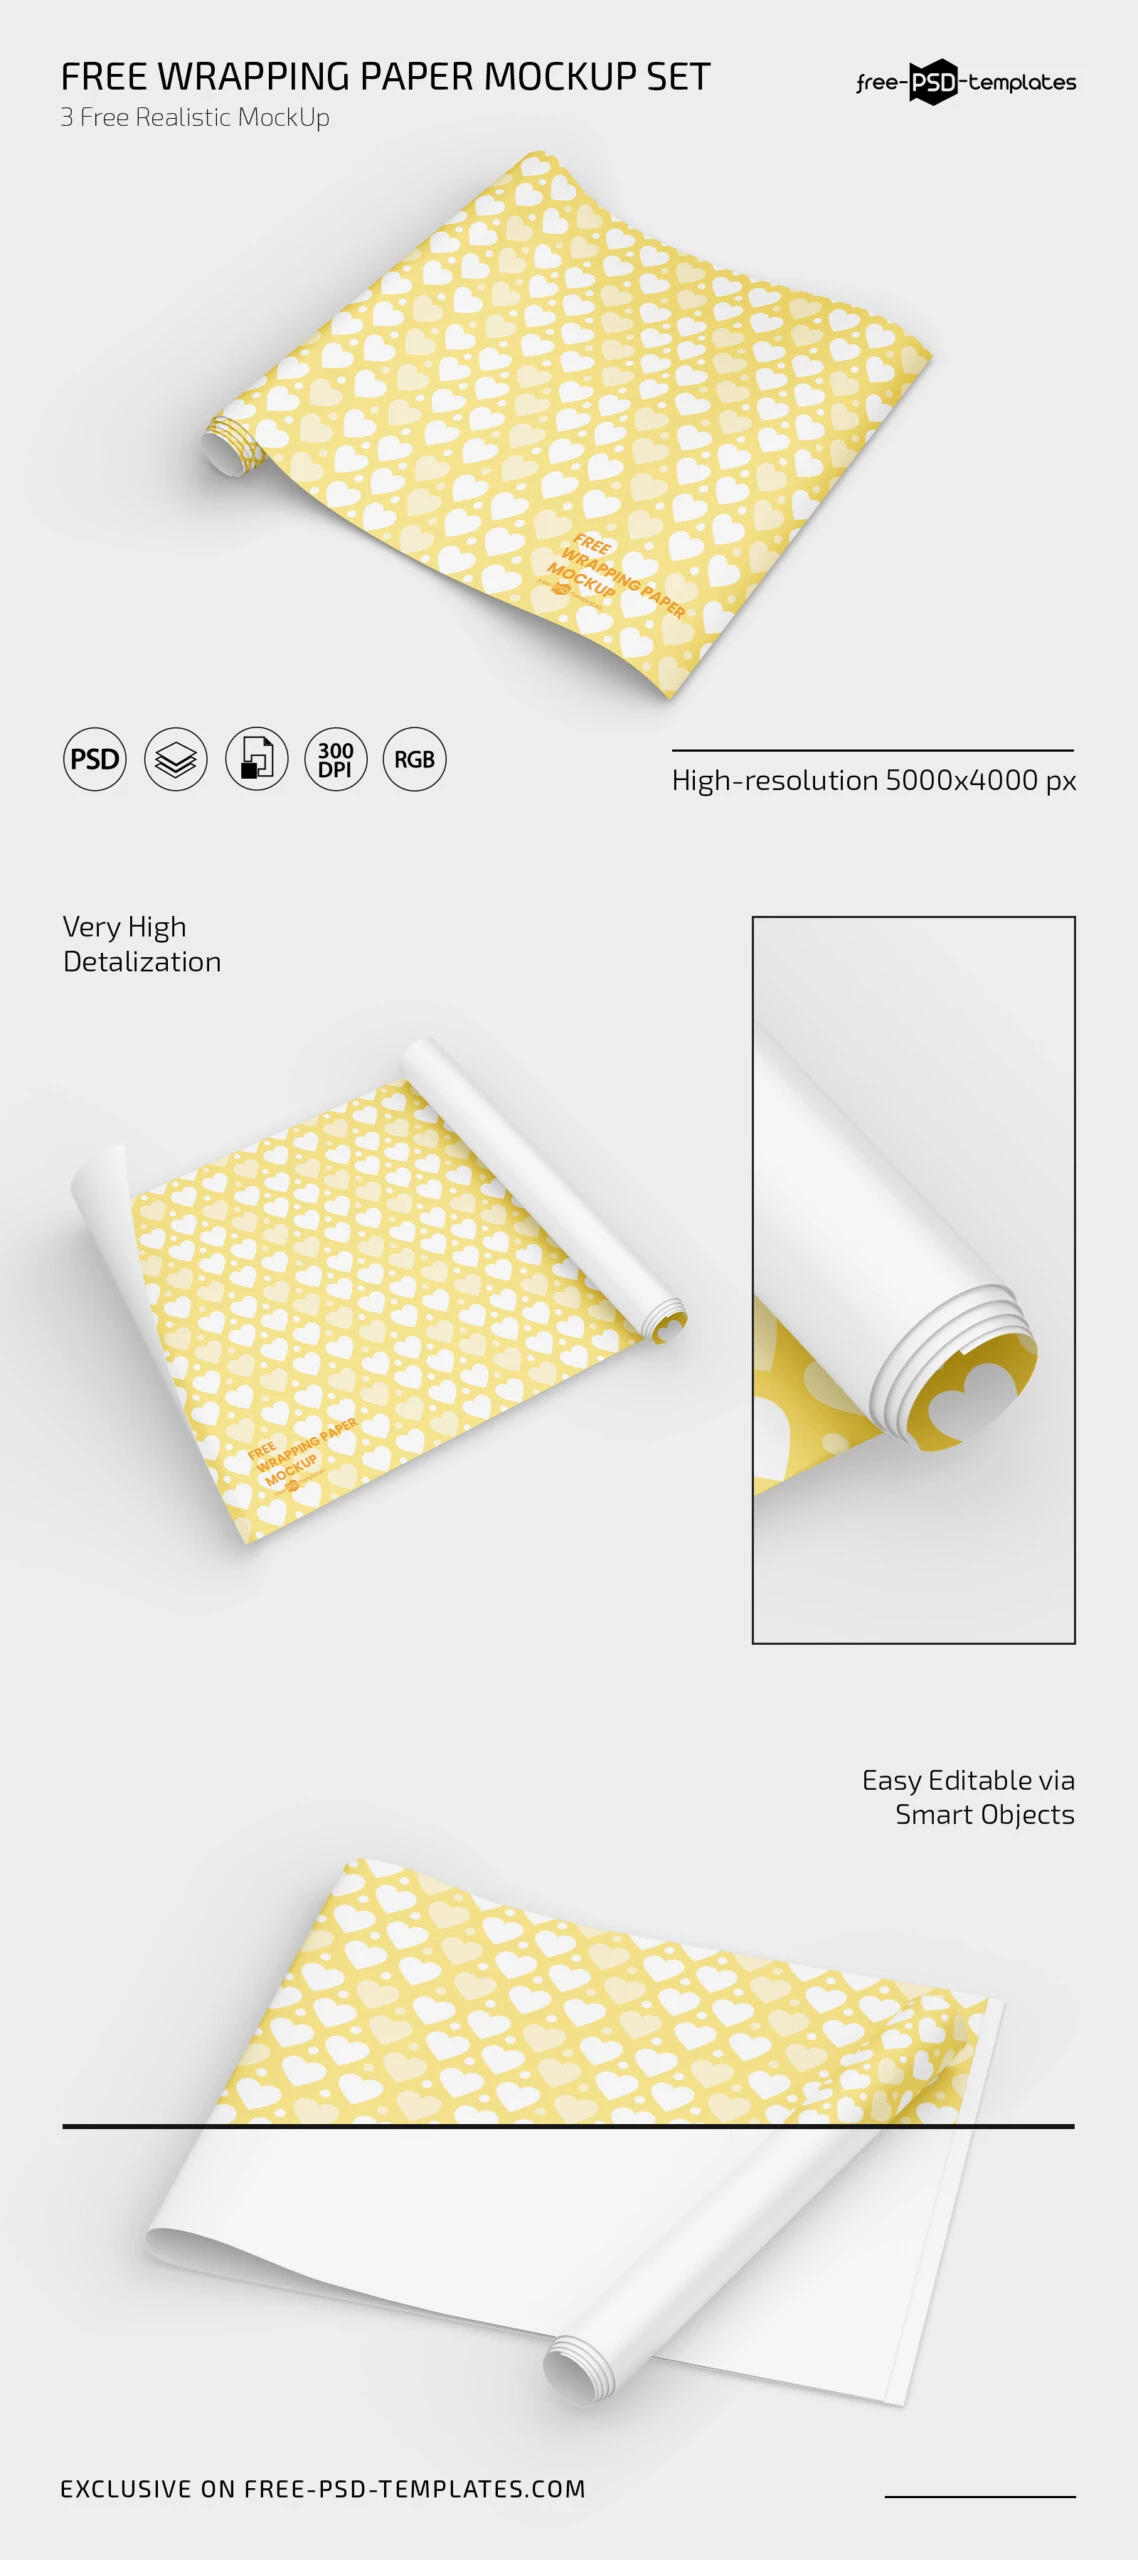 Free Wrapping Paper Mockup PSD Set